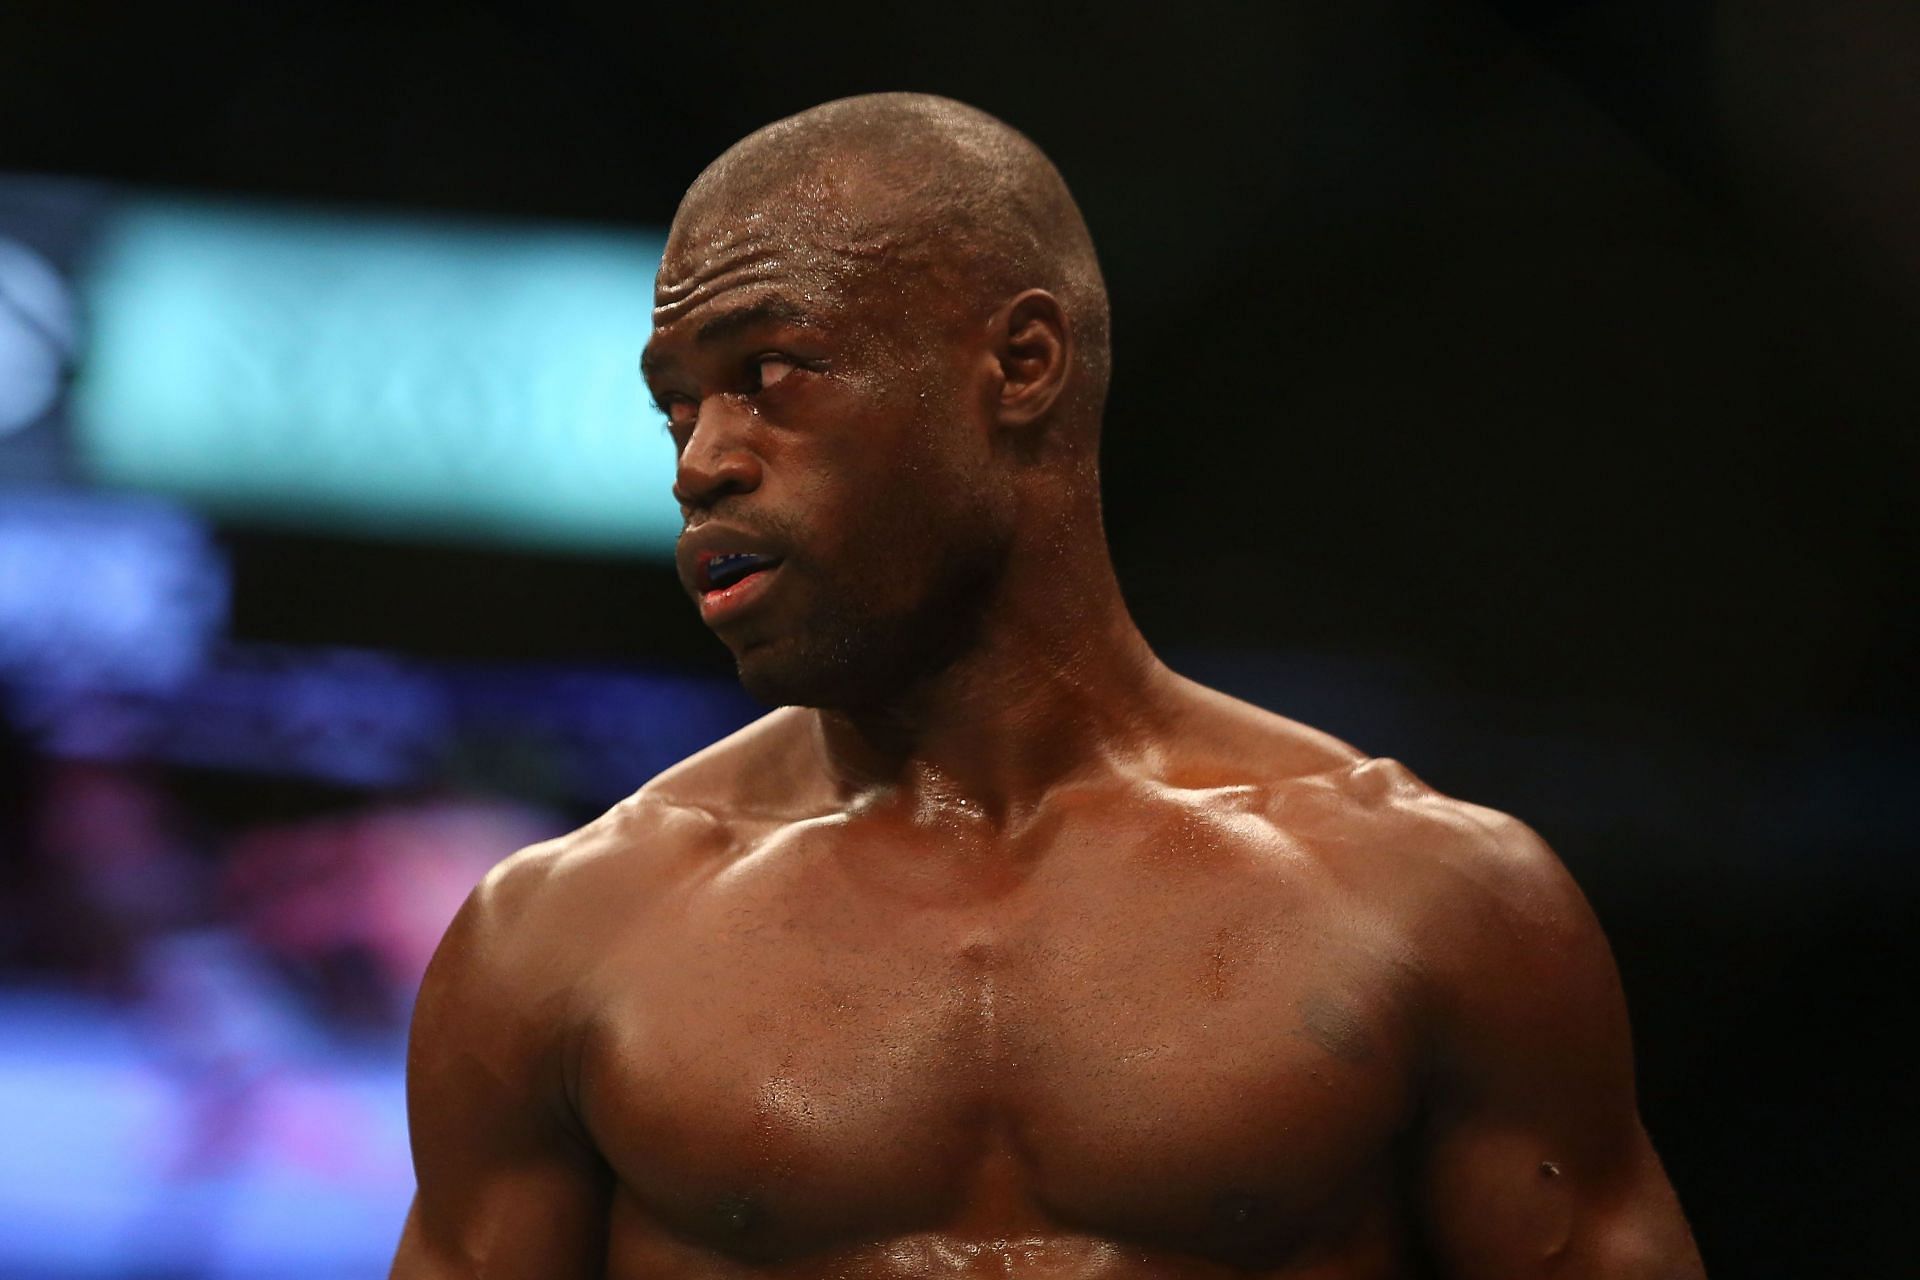 Uriah Hall has not always performed at his best under the spotlight